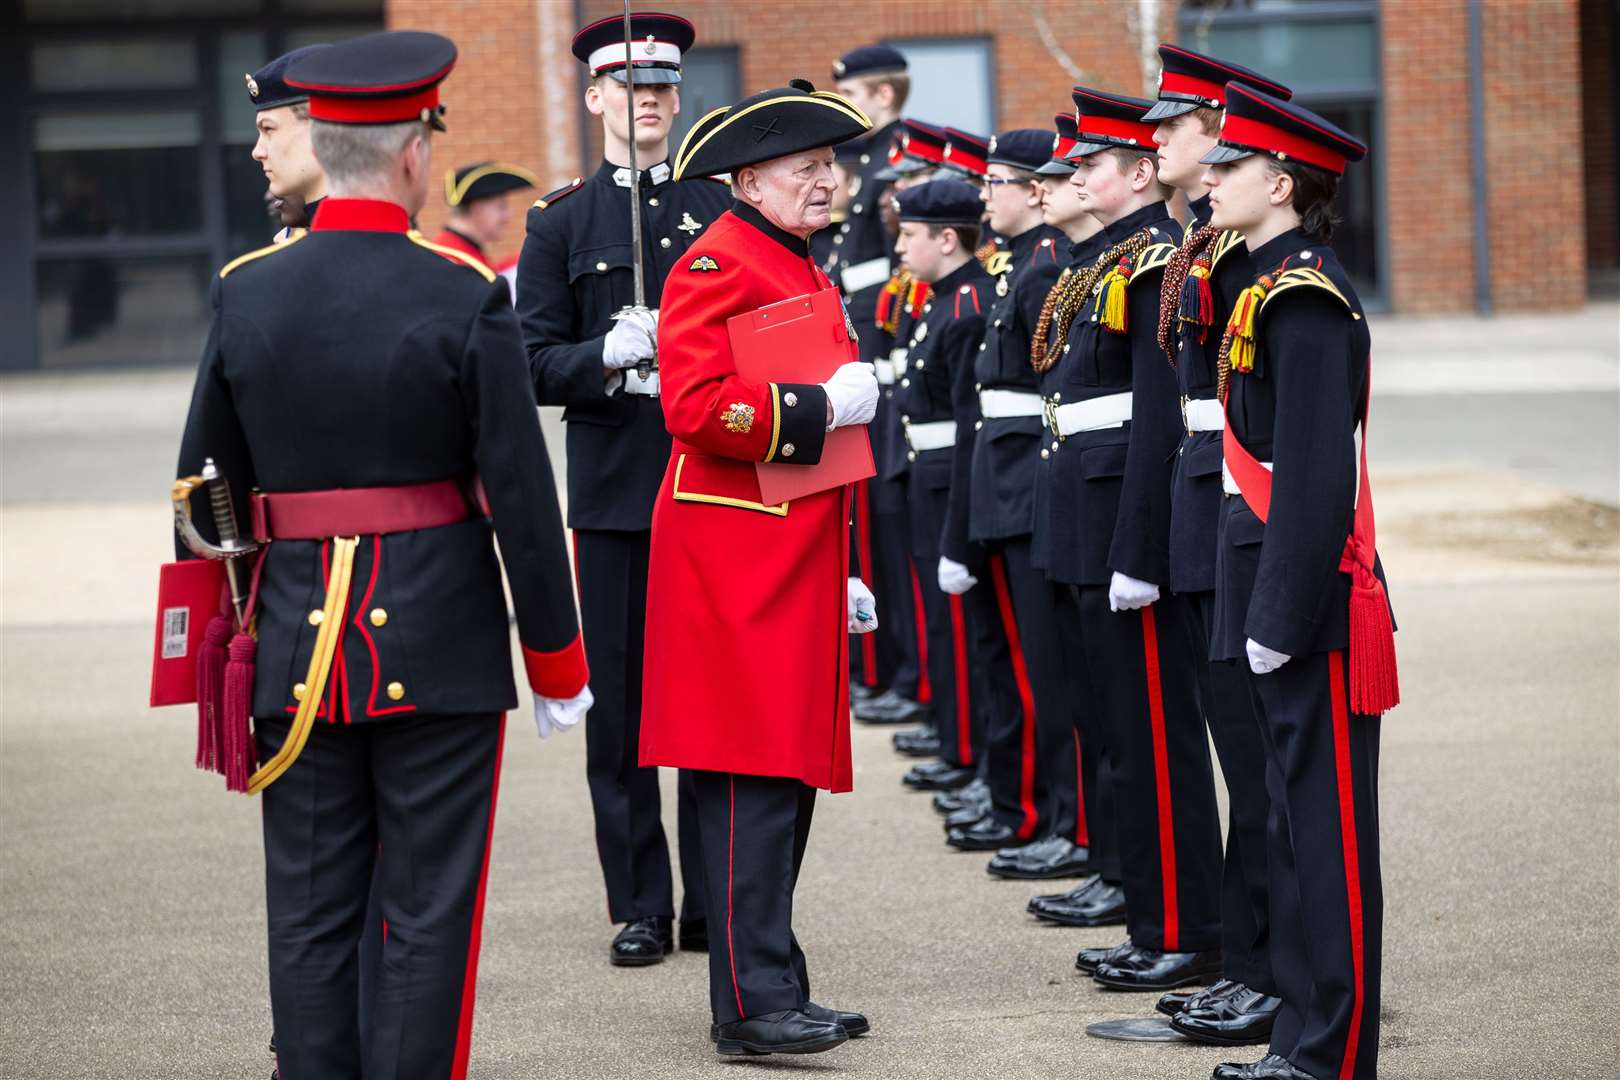 Inspection by former student and Chelsea Pensioner Jack Frost MBE. Photo by Matt Bristow/mattbristow.net